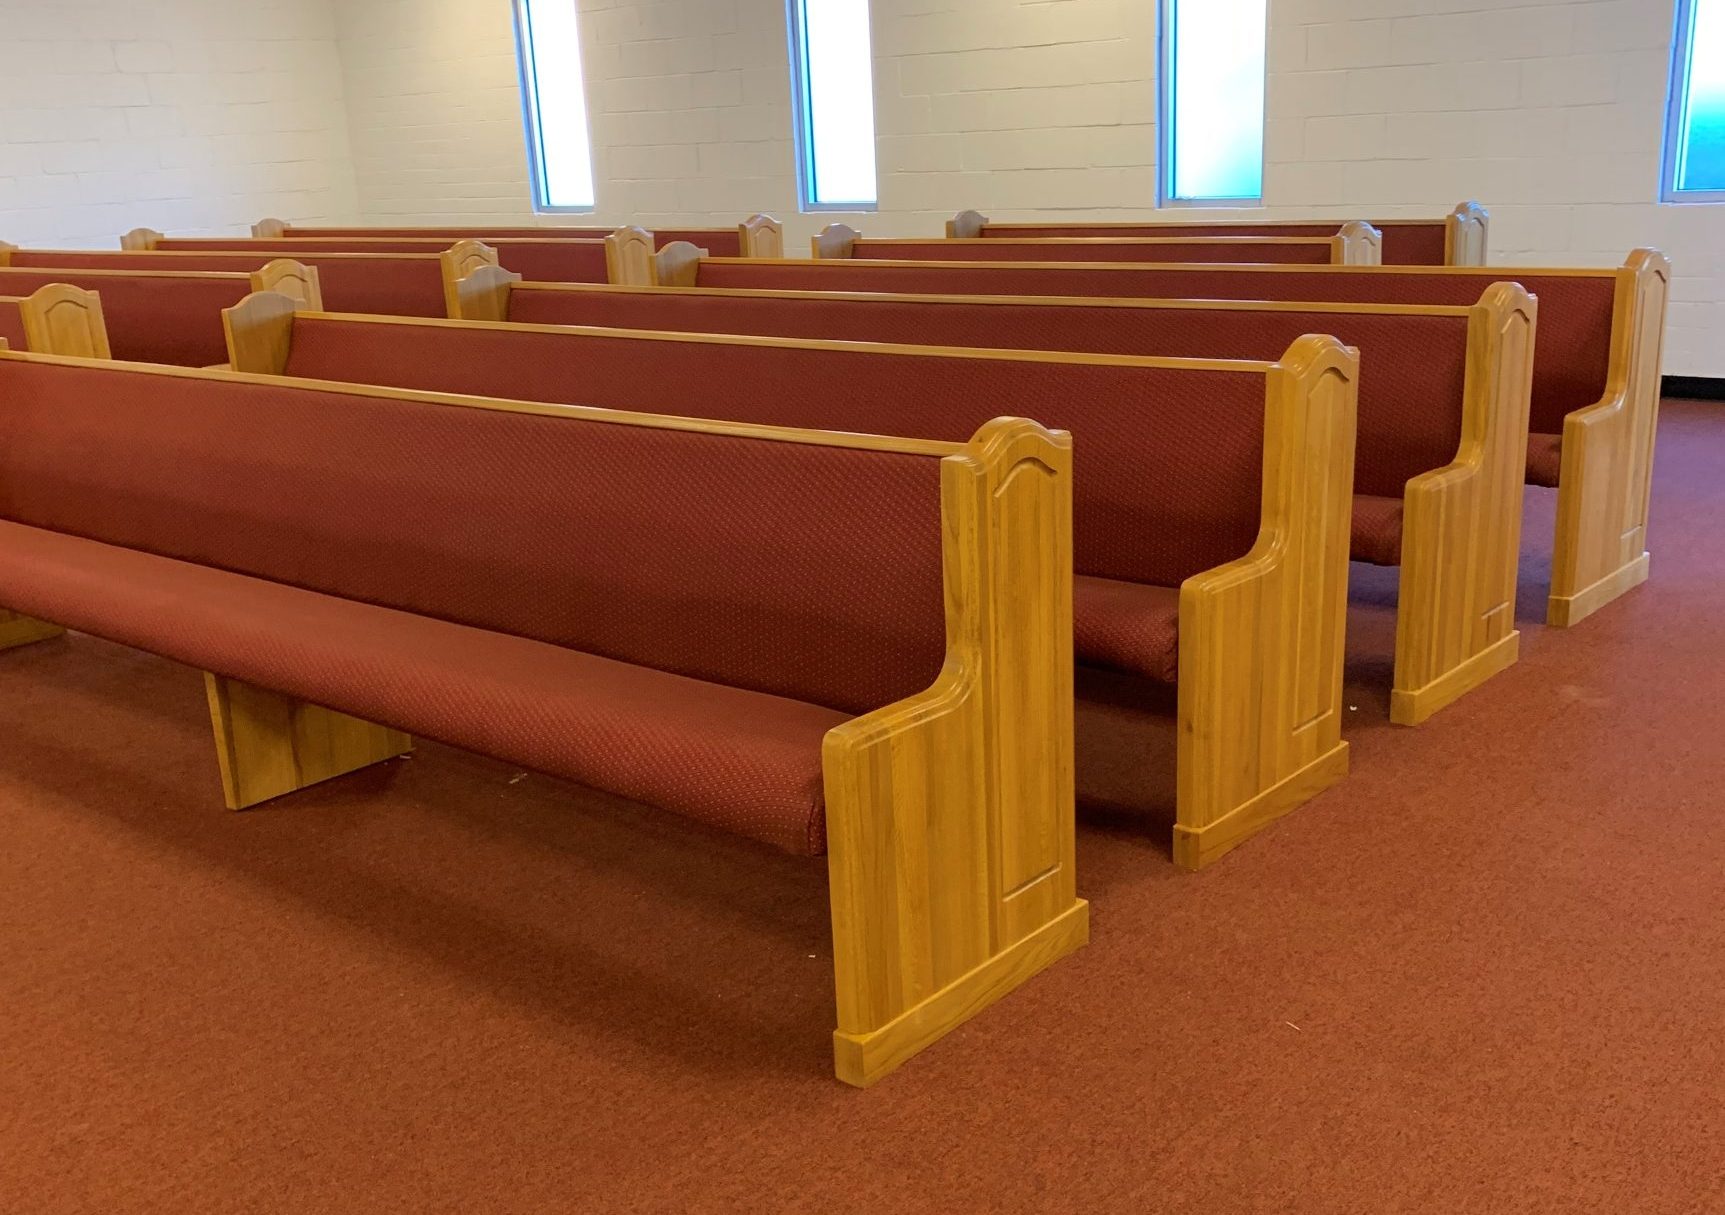 New Church pews installed by Woods Church Interiors at Church of our Living God in Woodville, North Carolina - 80